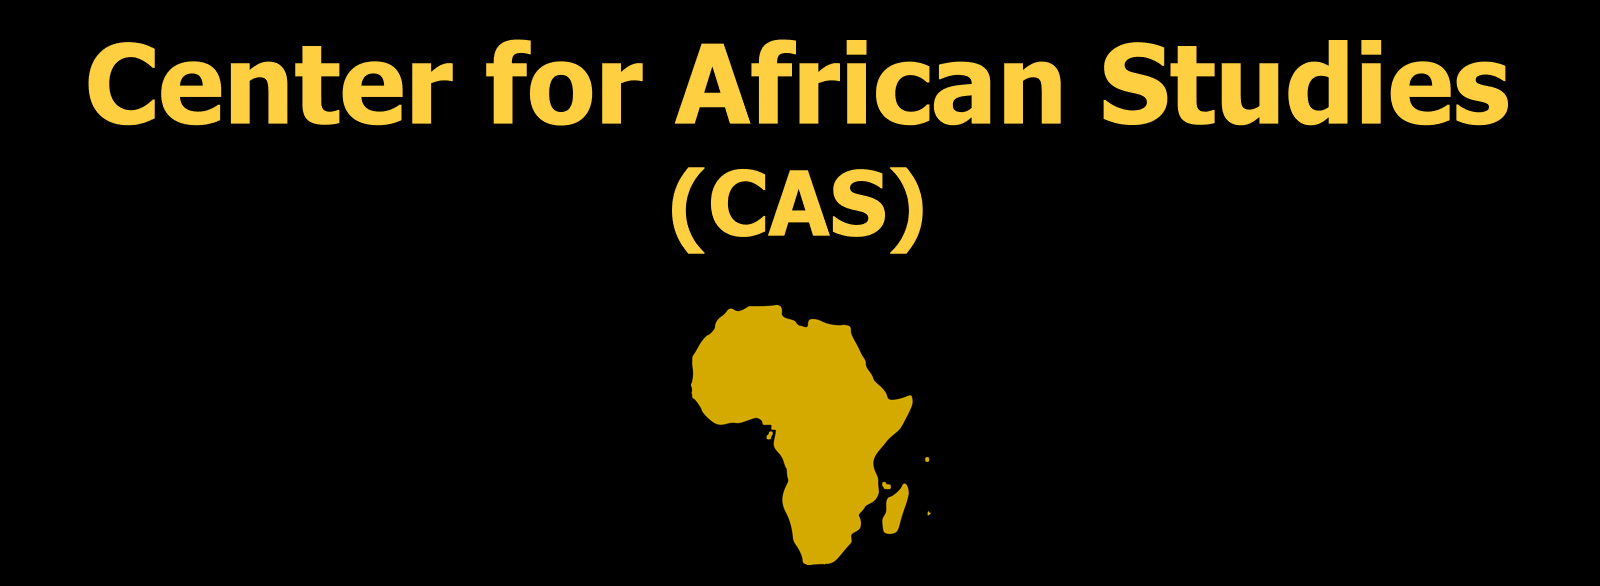 Center for African Studies (CAS) without logo